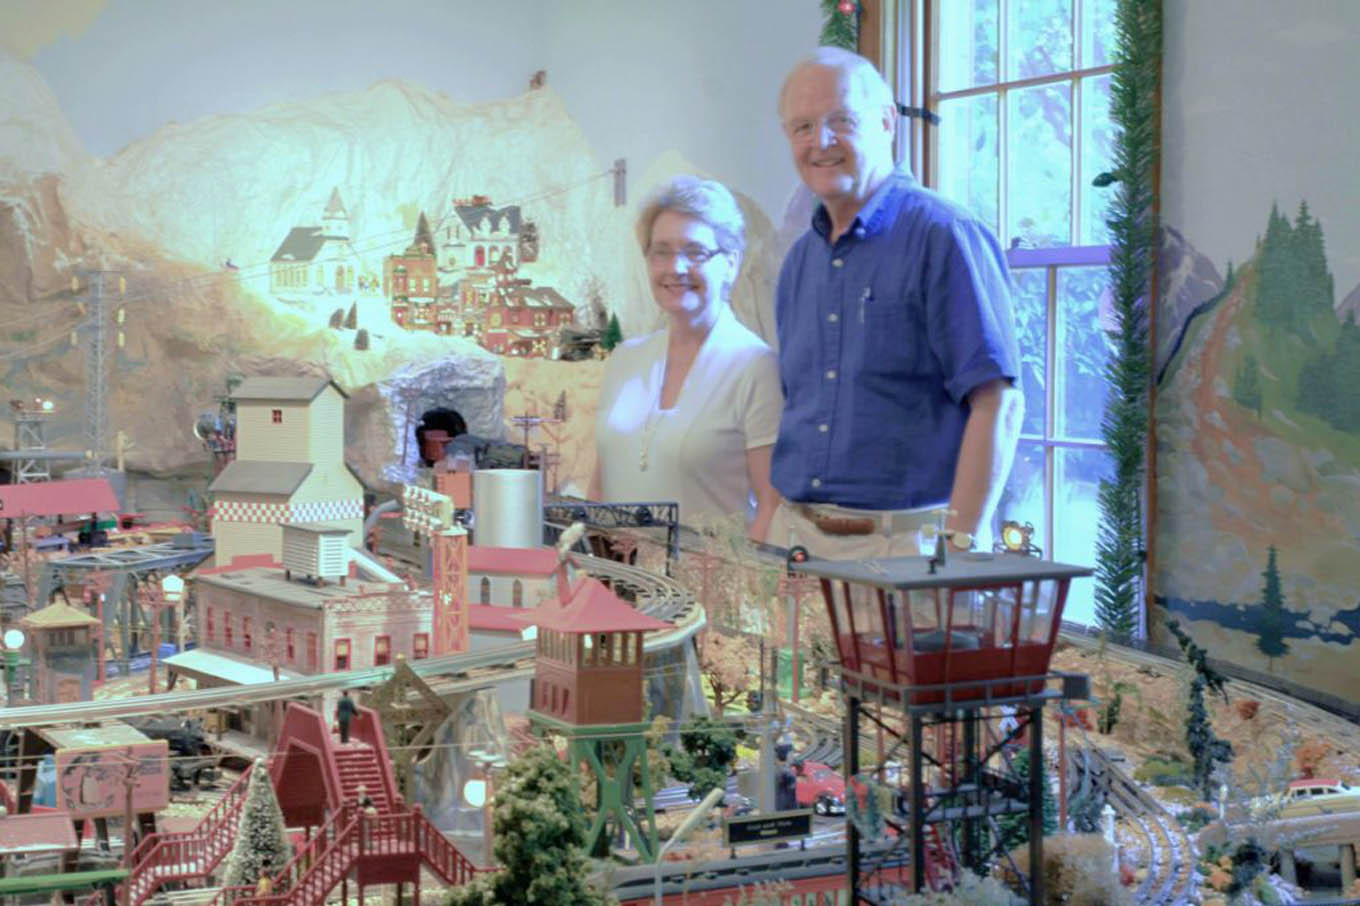 Click to enlarge,  Richard Hayes, pictured with his wife Rebecca, has donated his model train collection to the Central Carolina Community College Foundation for the establishment of the Richard and Rebecca Hayes Endowed Lecture Fund for Environmental Policy and Stewardship.  